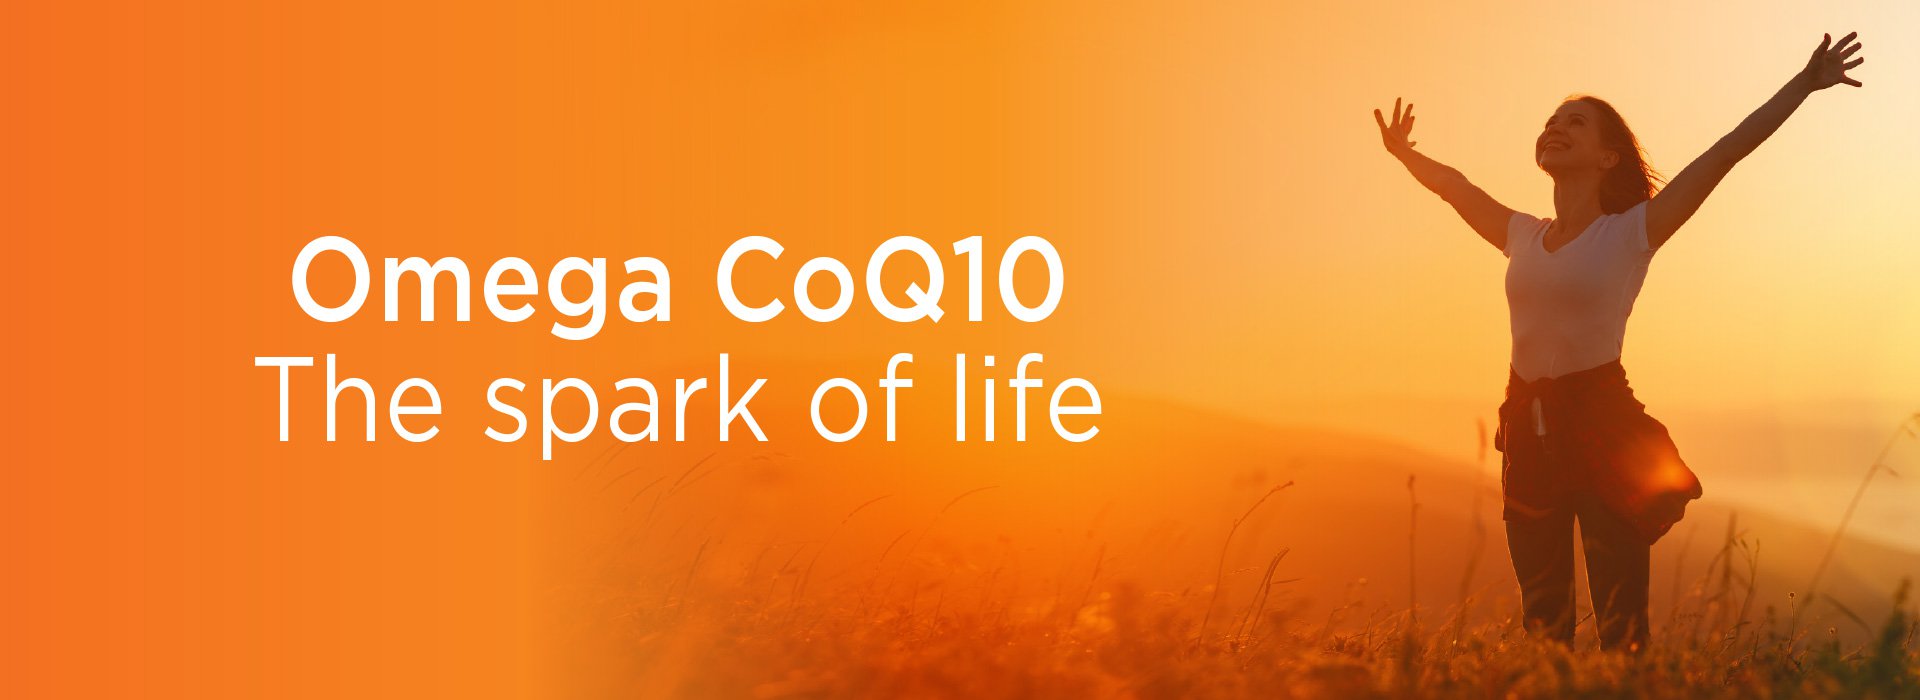 New Image International:Omega CoQ10 The spark of life